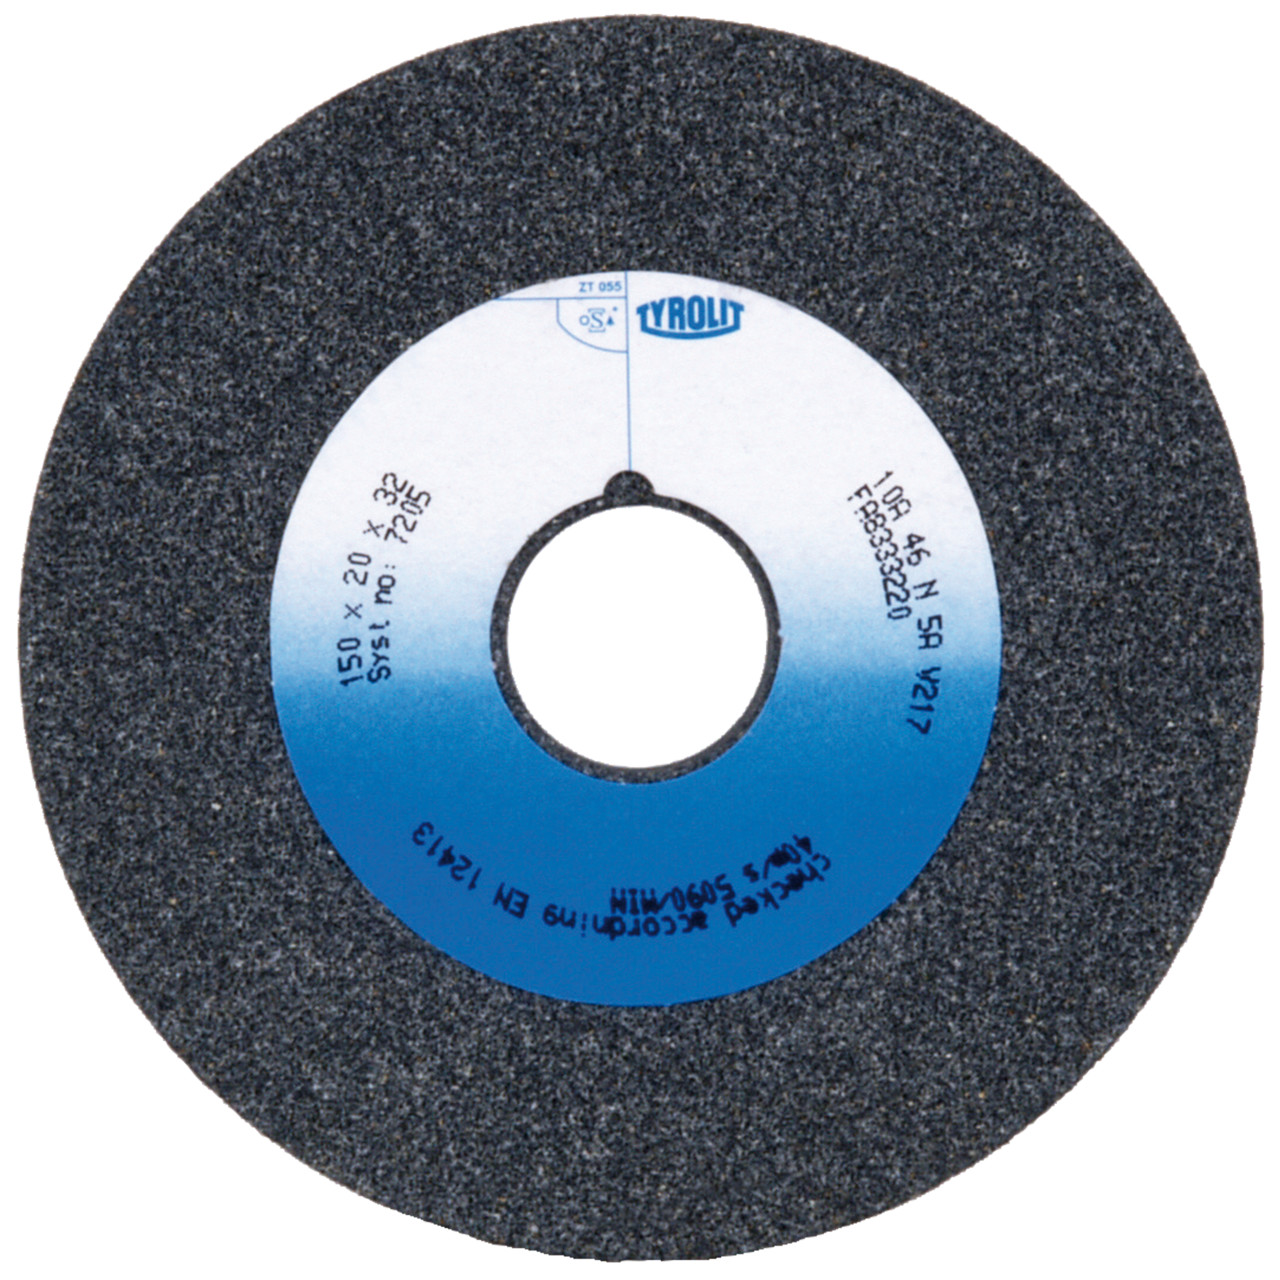 Tyrolit Conventional ceramic grinding discs DxDxH 175x25x32 For unalloyed and low-alloy steels, shape: 1, Art. 2962